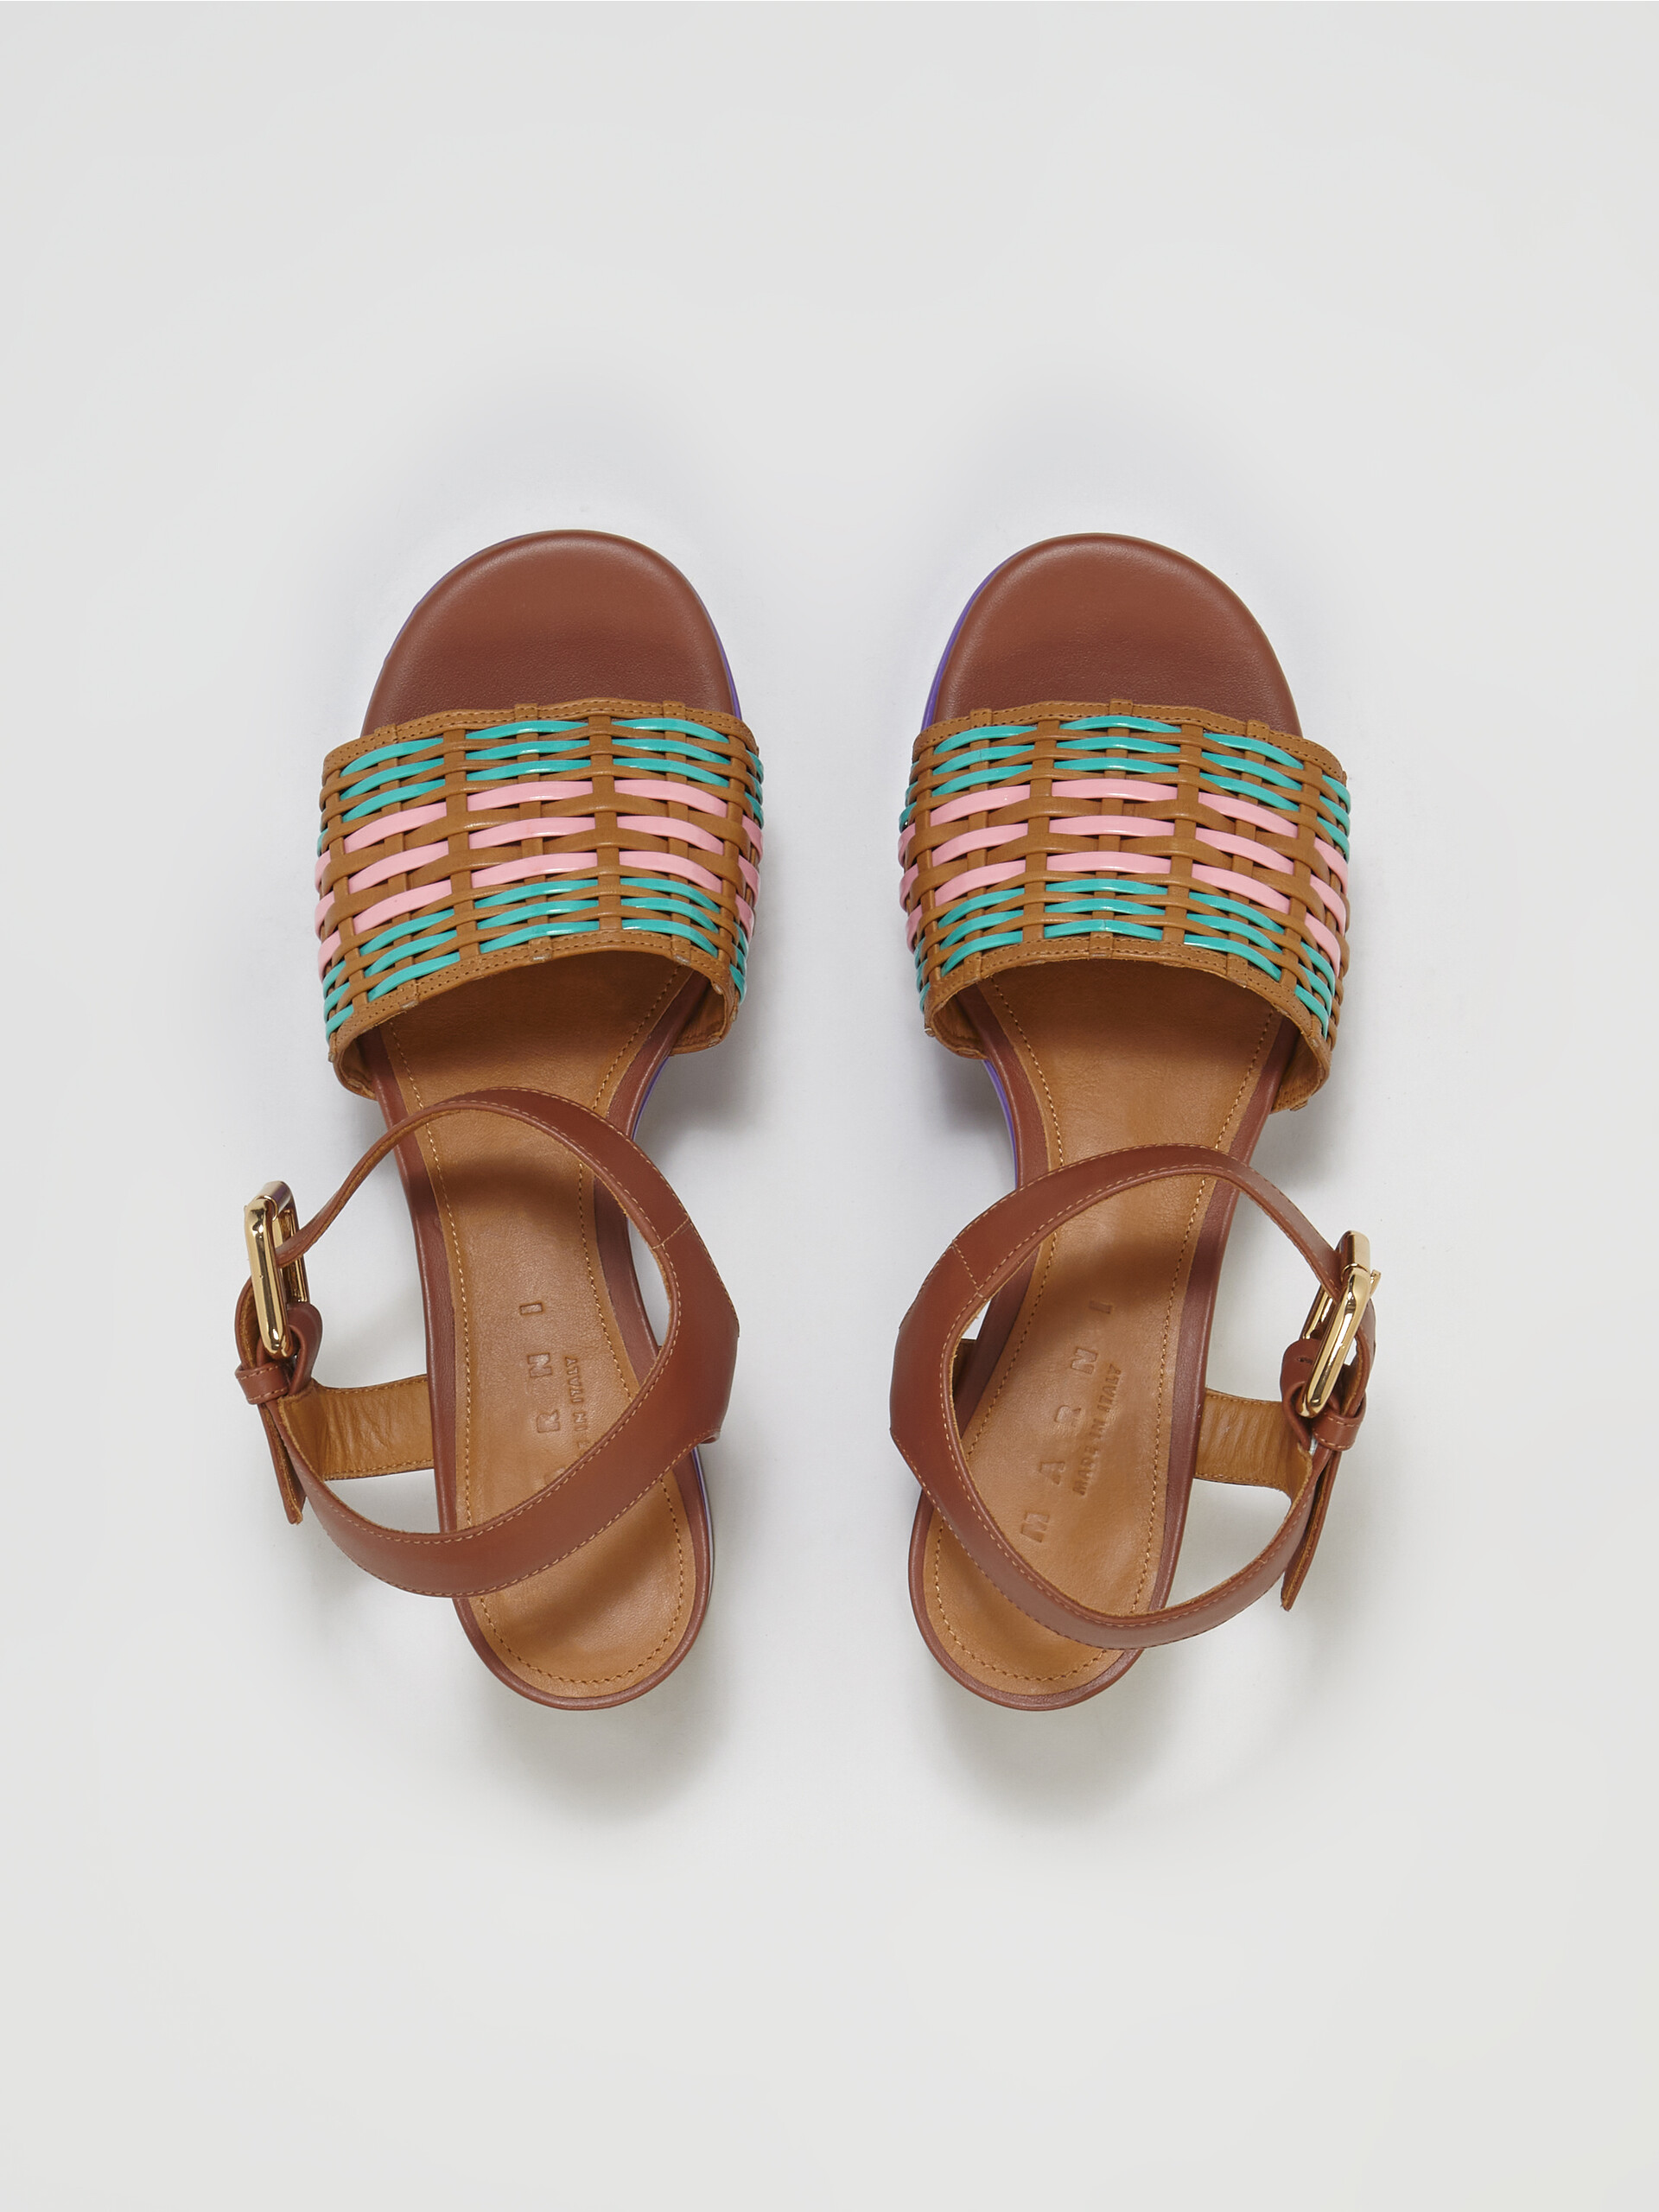 Hand woven vegetable-tanned leather sandal - Sandals - Image 4